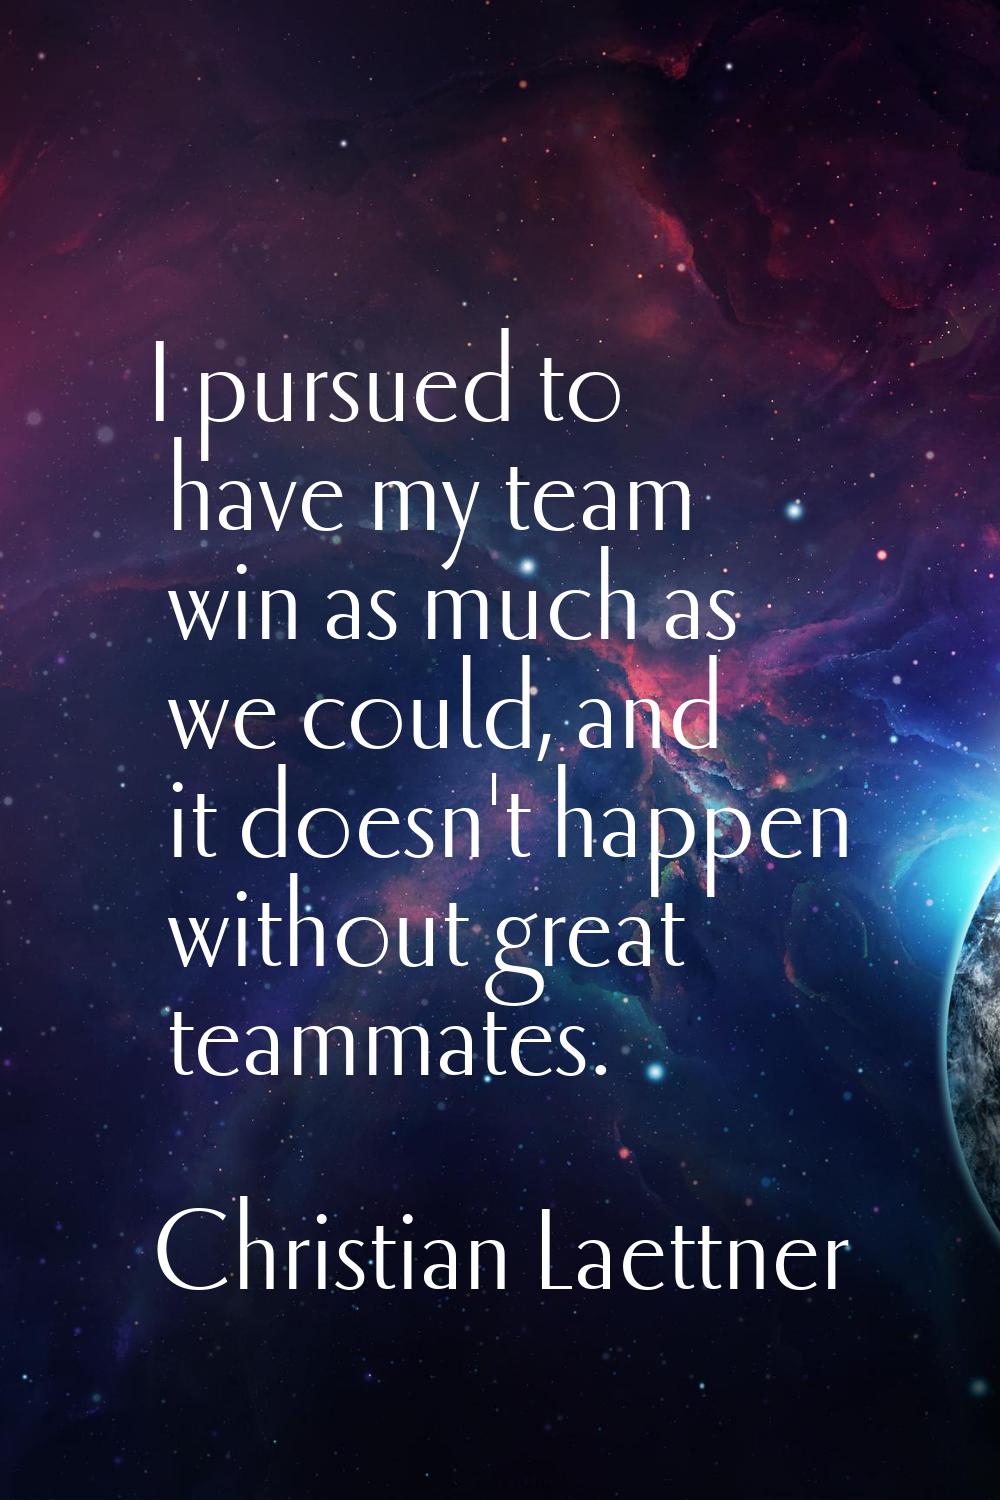 I pursued to have my team win as much as we could, and it doesn't happen without great teammates.